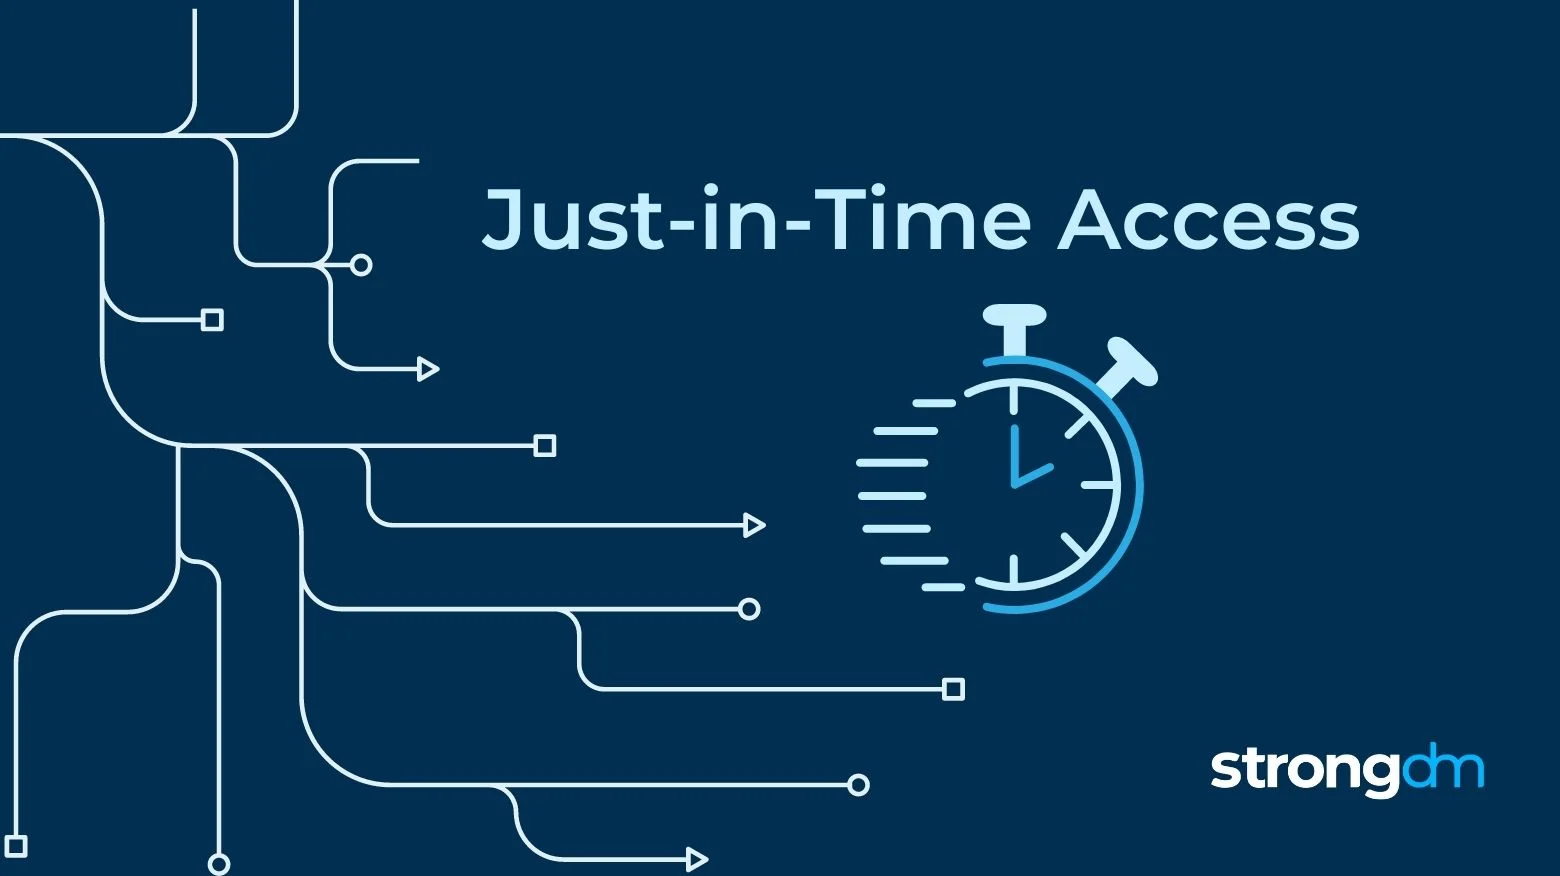 Just-in-time Access (JIT)